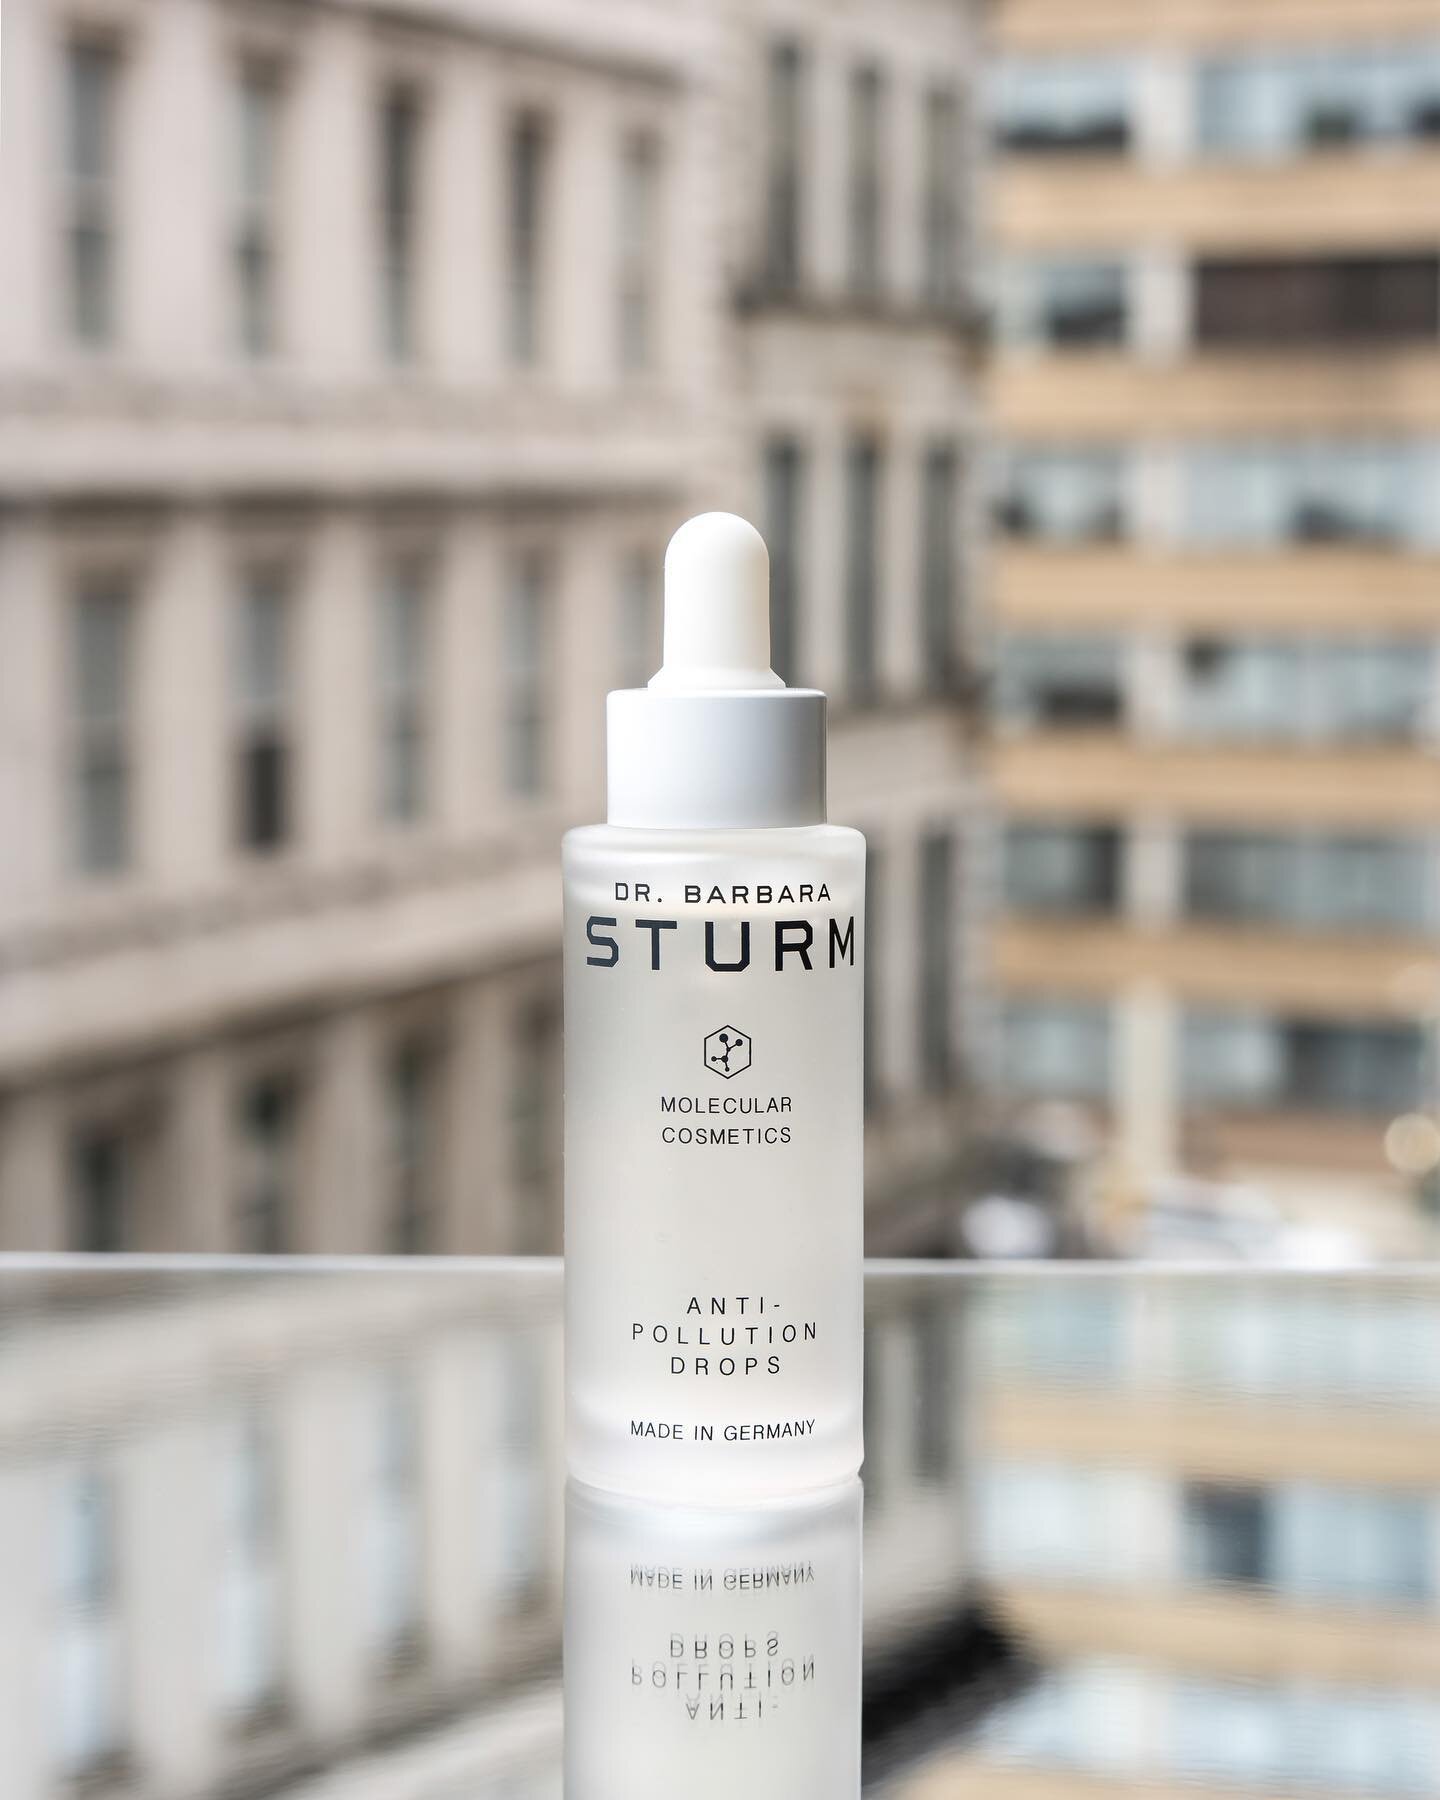 Air pollution, UV, and blue light radiation emitted from our digital screens degrade skin&rsquo;s barrier function and trigger inflammation that causes dehydration, irritation, and loss of skin elasticity and firmness. 

@drbarbarasturm &lsquo;s inno